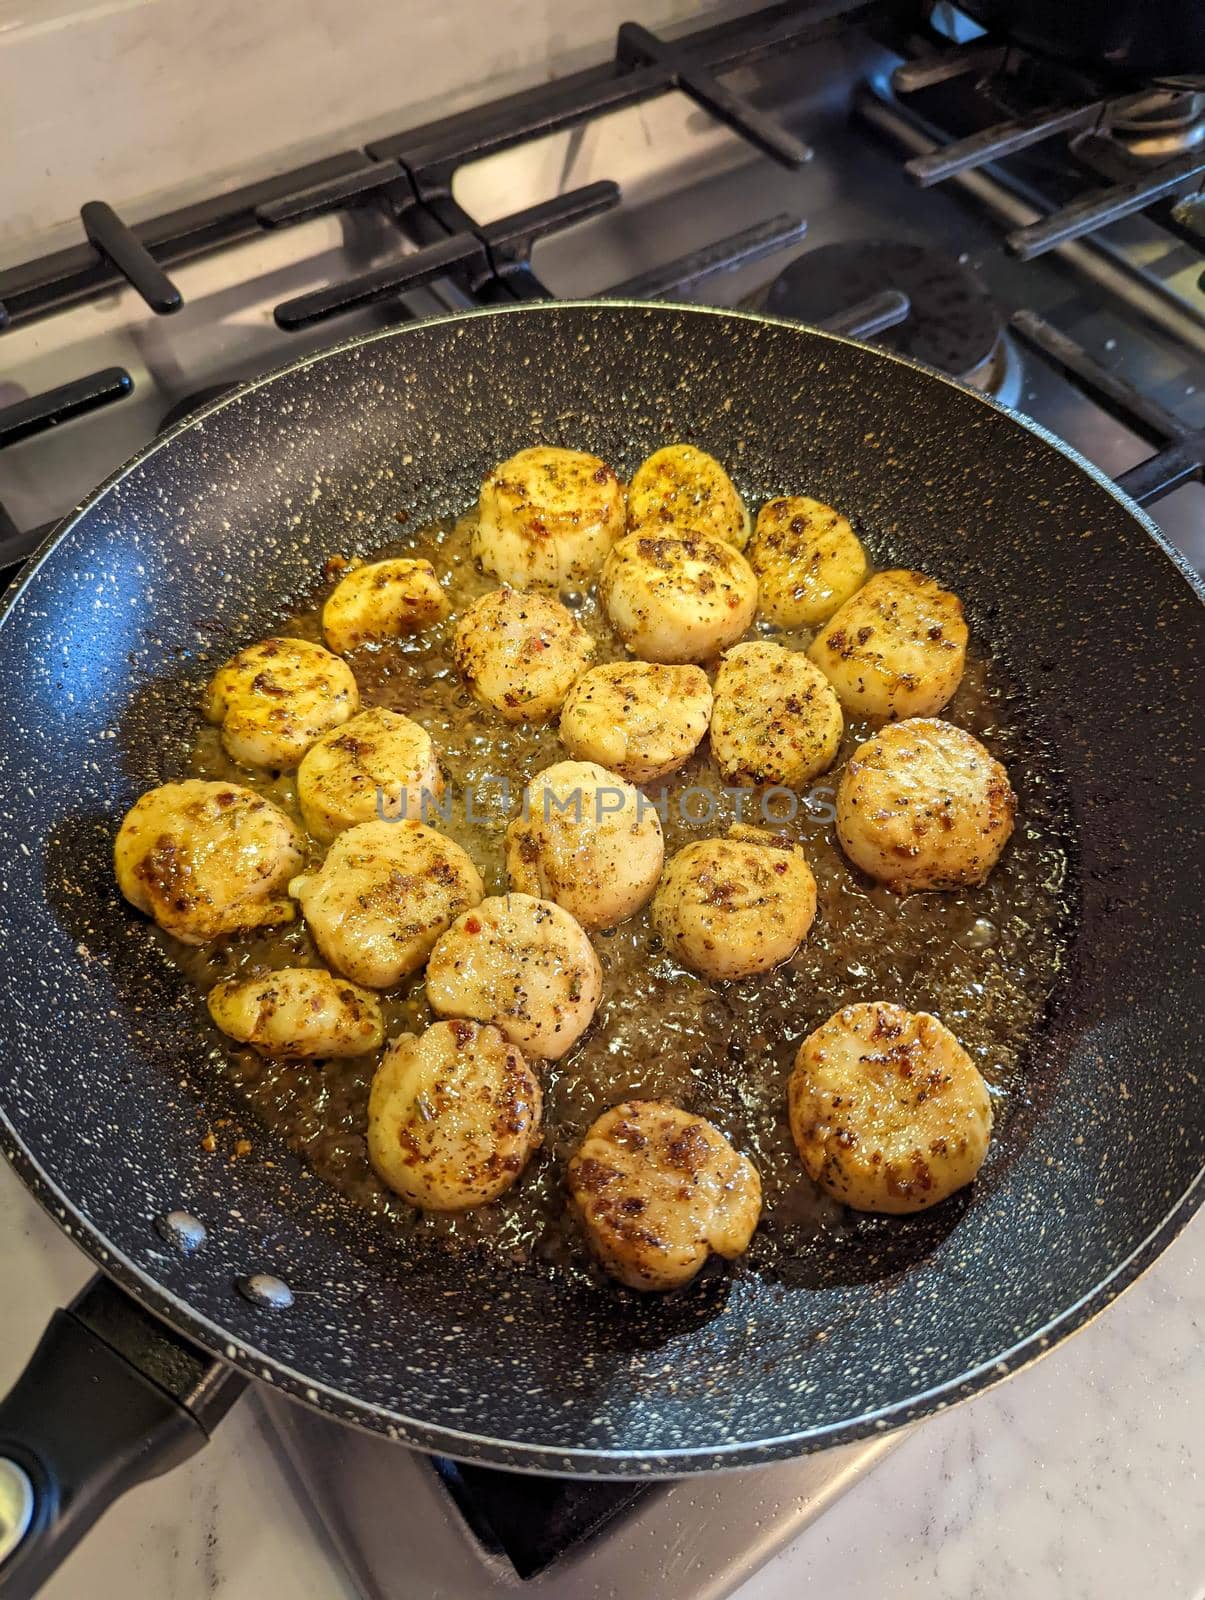 Fried scallops with butter and garlic sauce